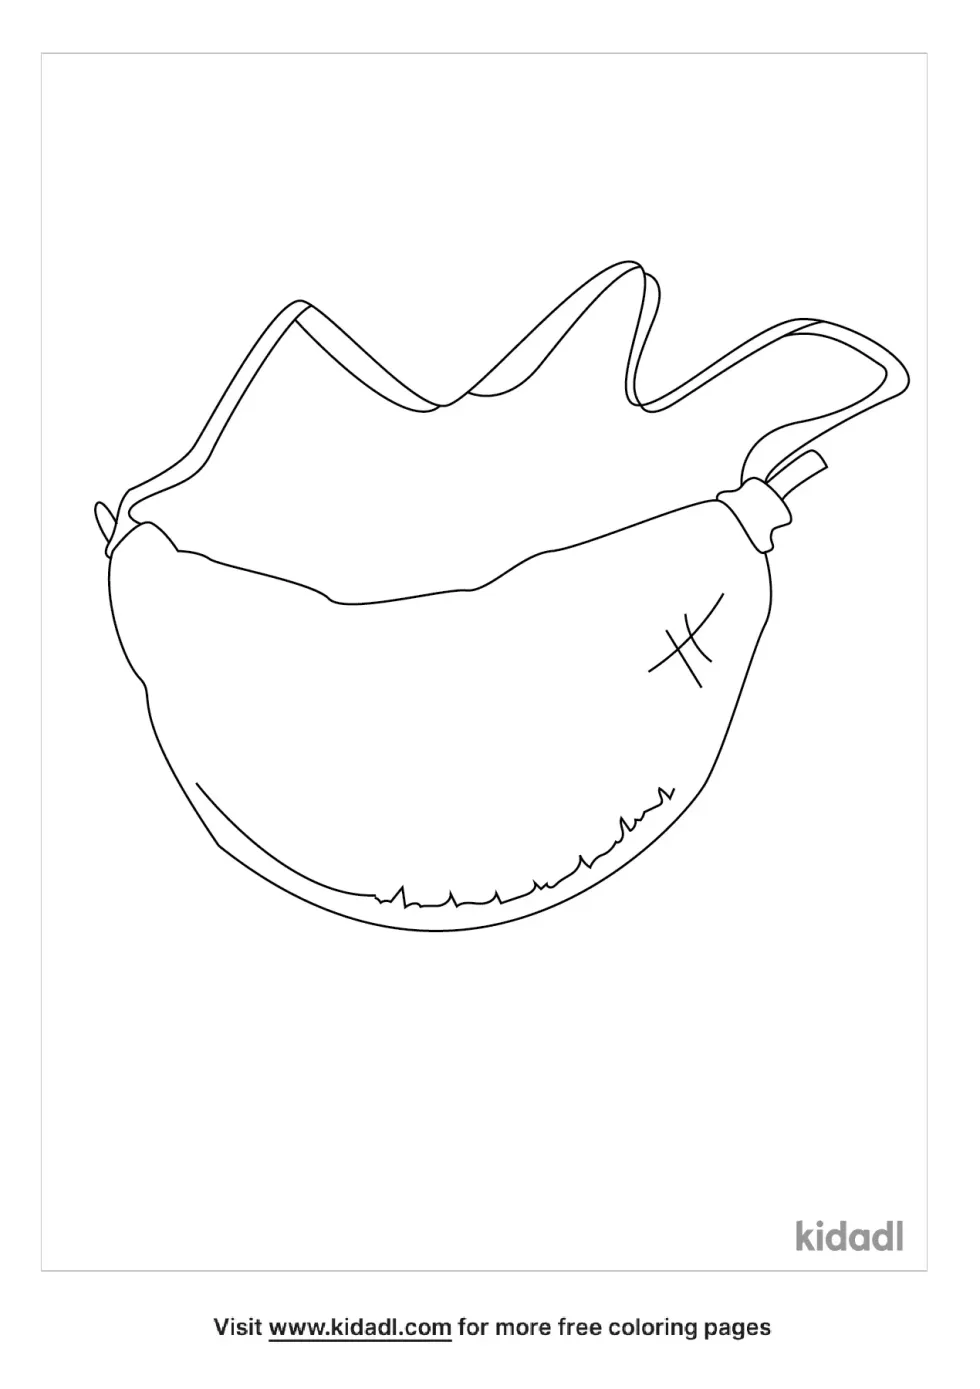 Wine Skins Coloring Page